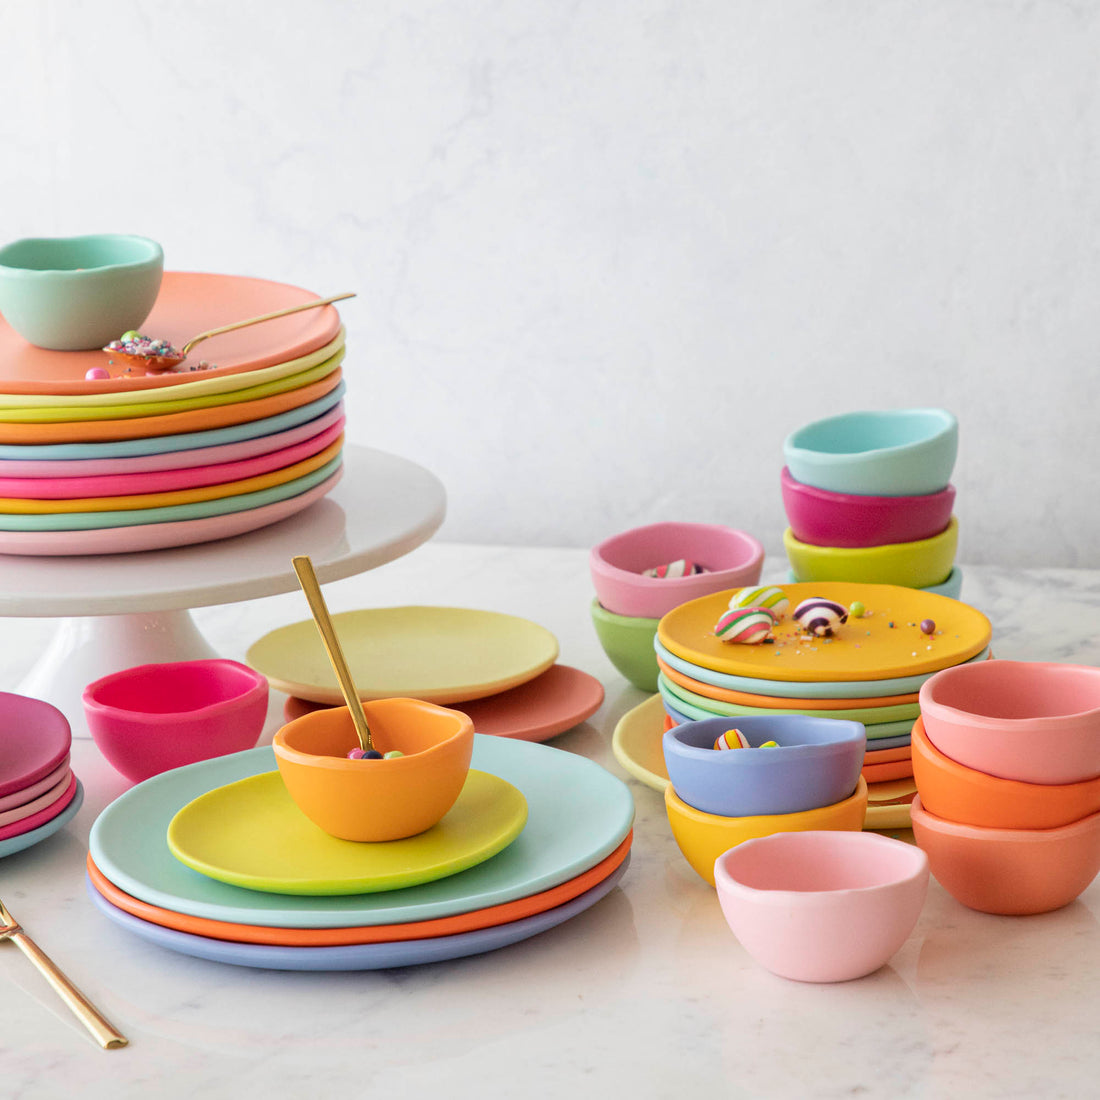 A stack of colorful plates and bowls on a white table.